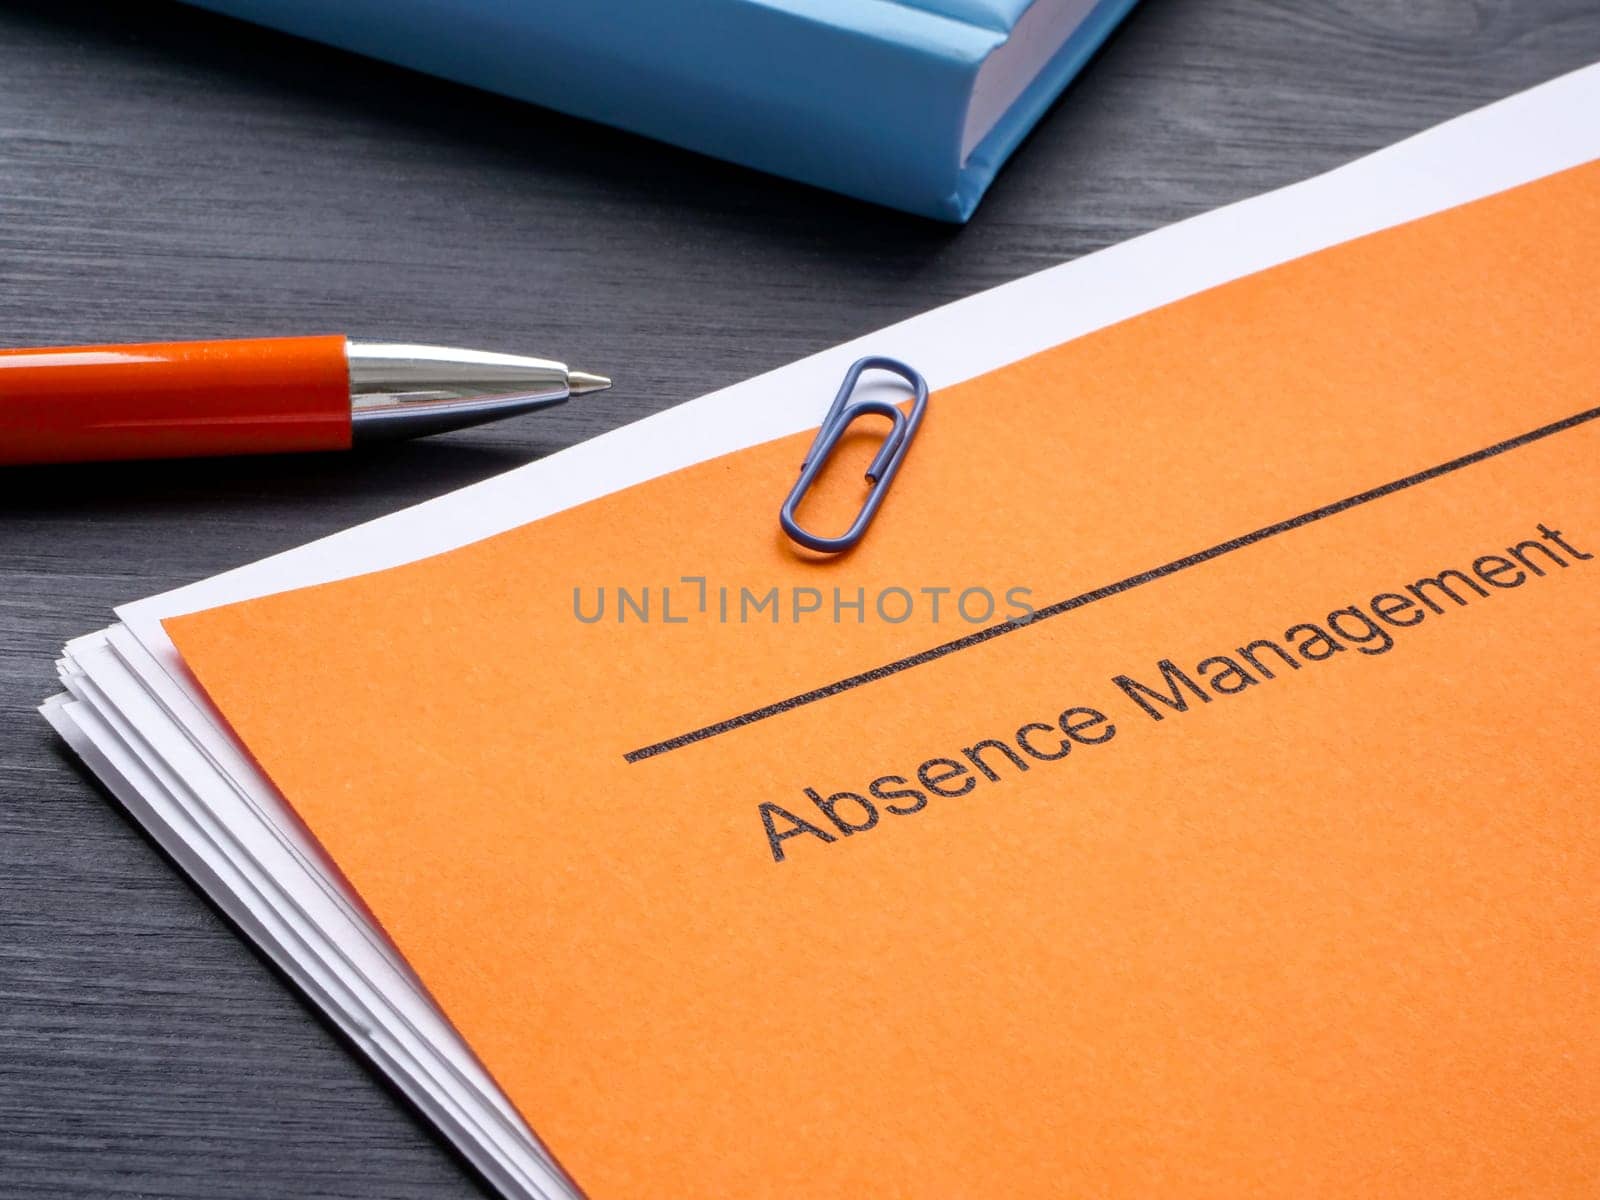 Documents about absence management and notepad. by designer491